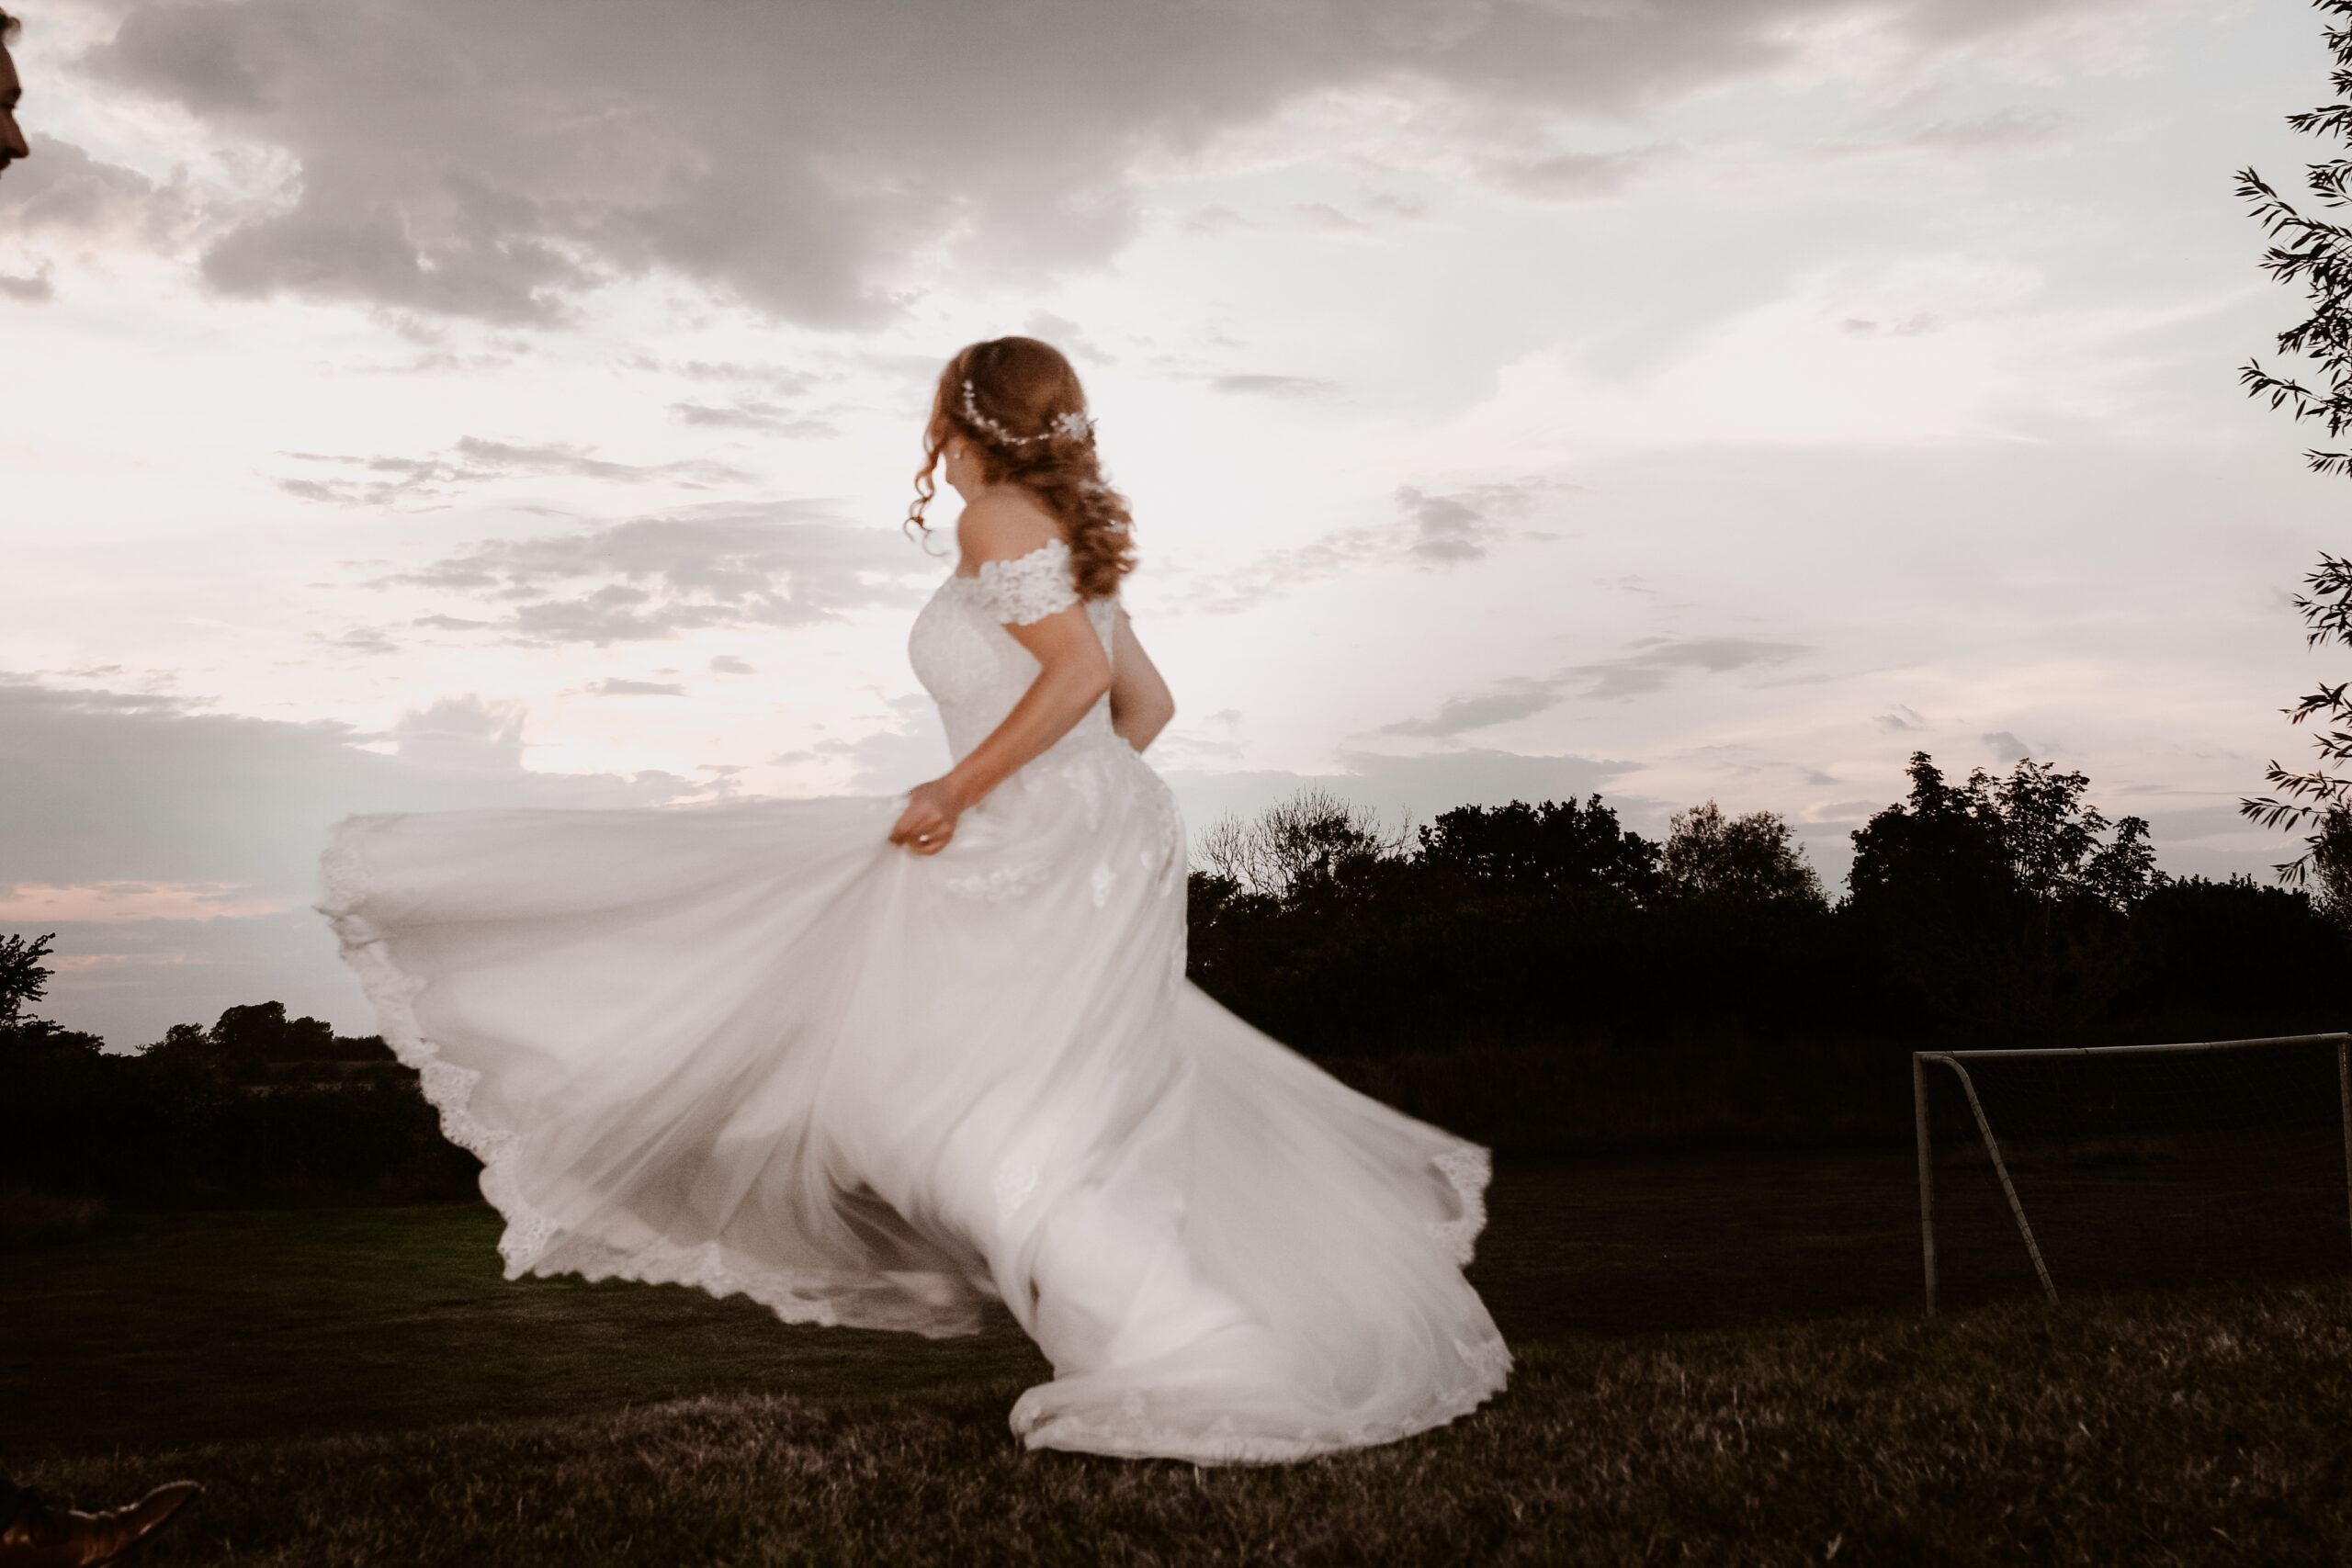 Sunset Wedding Photography at Wootton Park